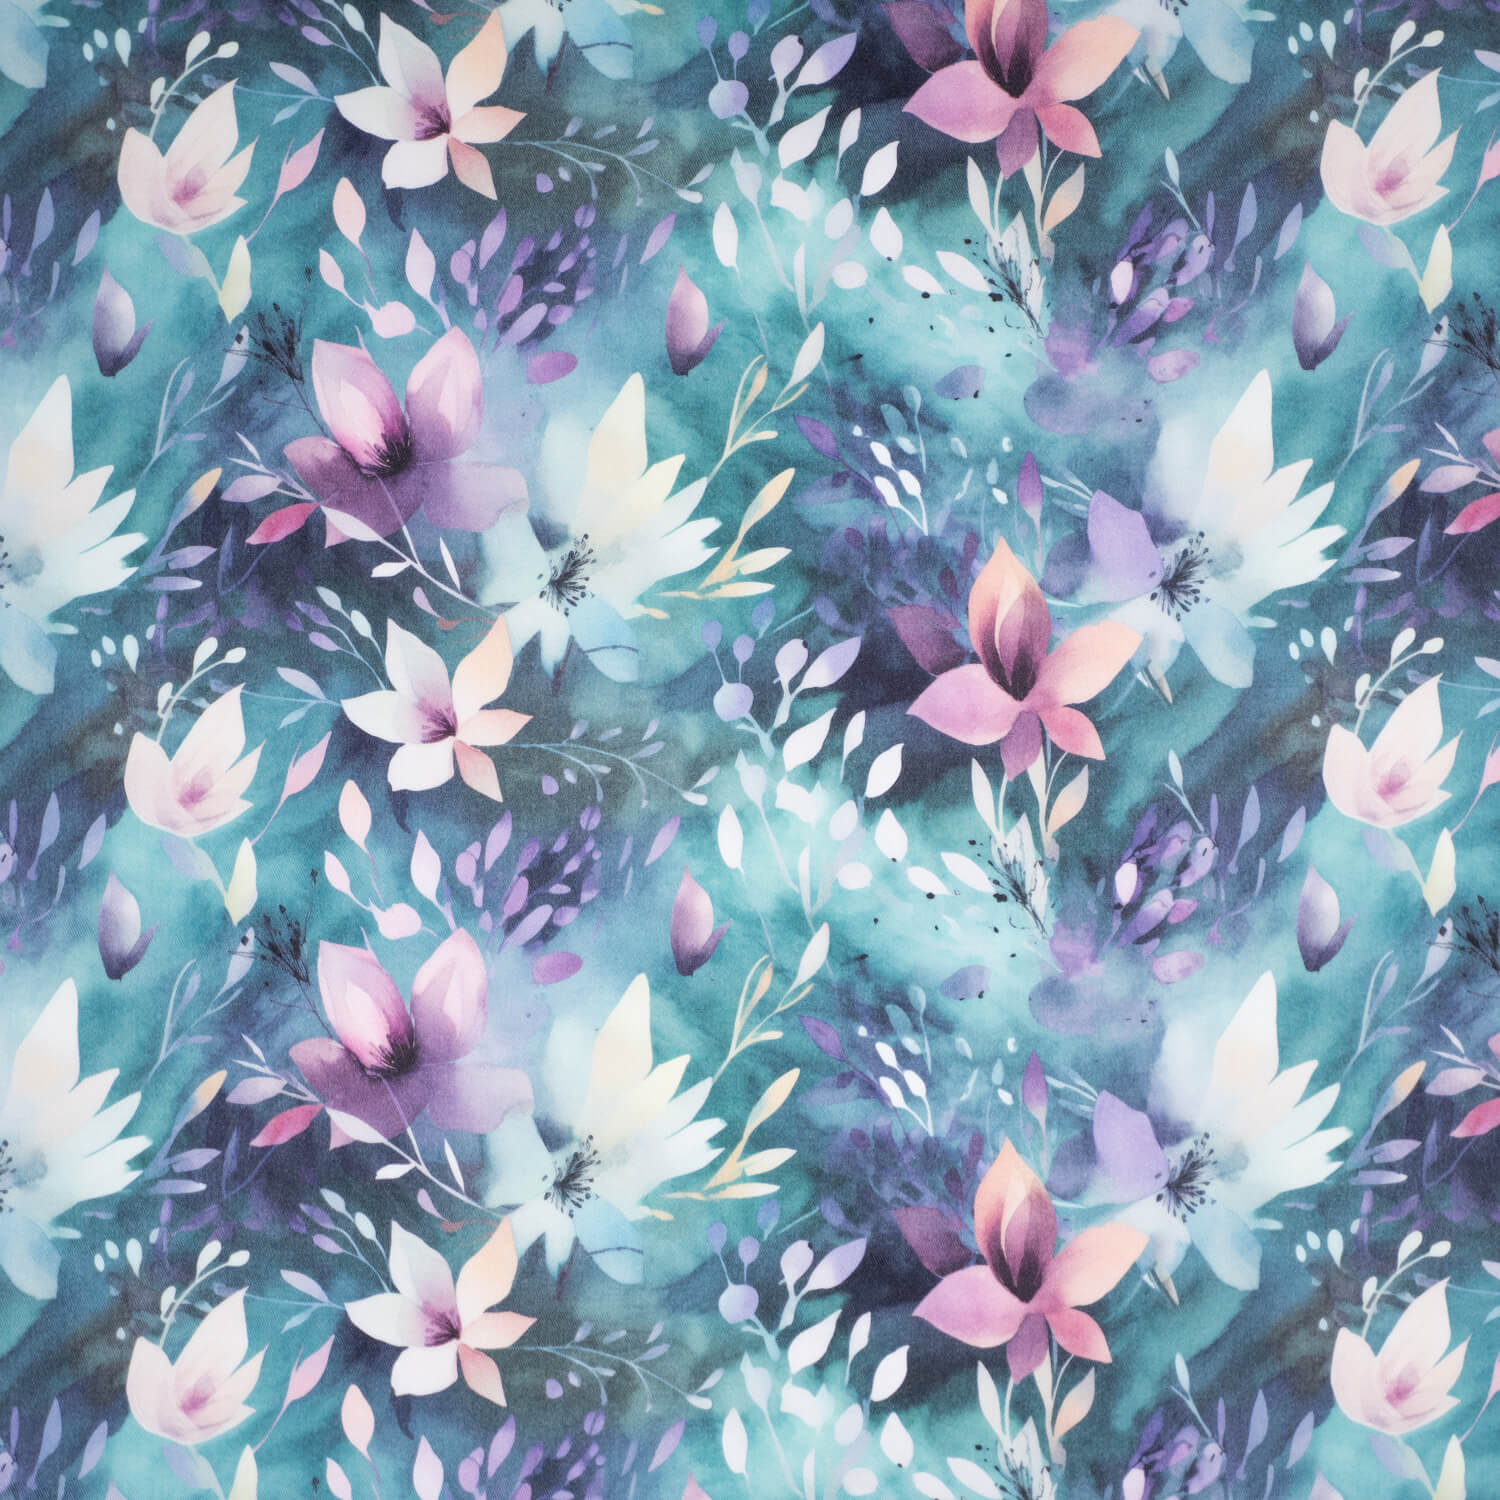 EP Teal and Purple Watercolor Flowers